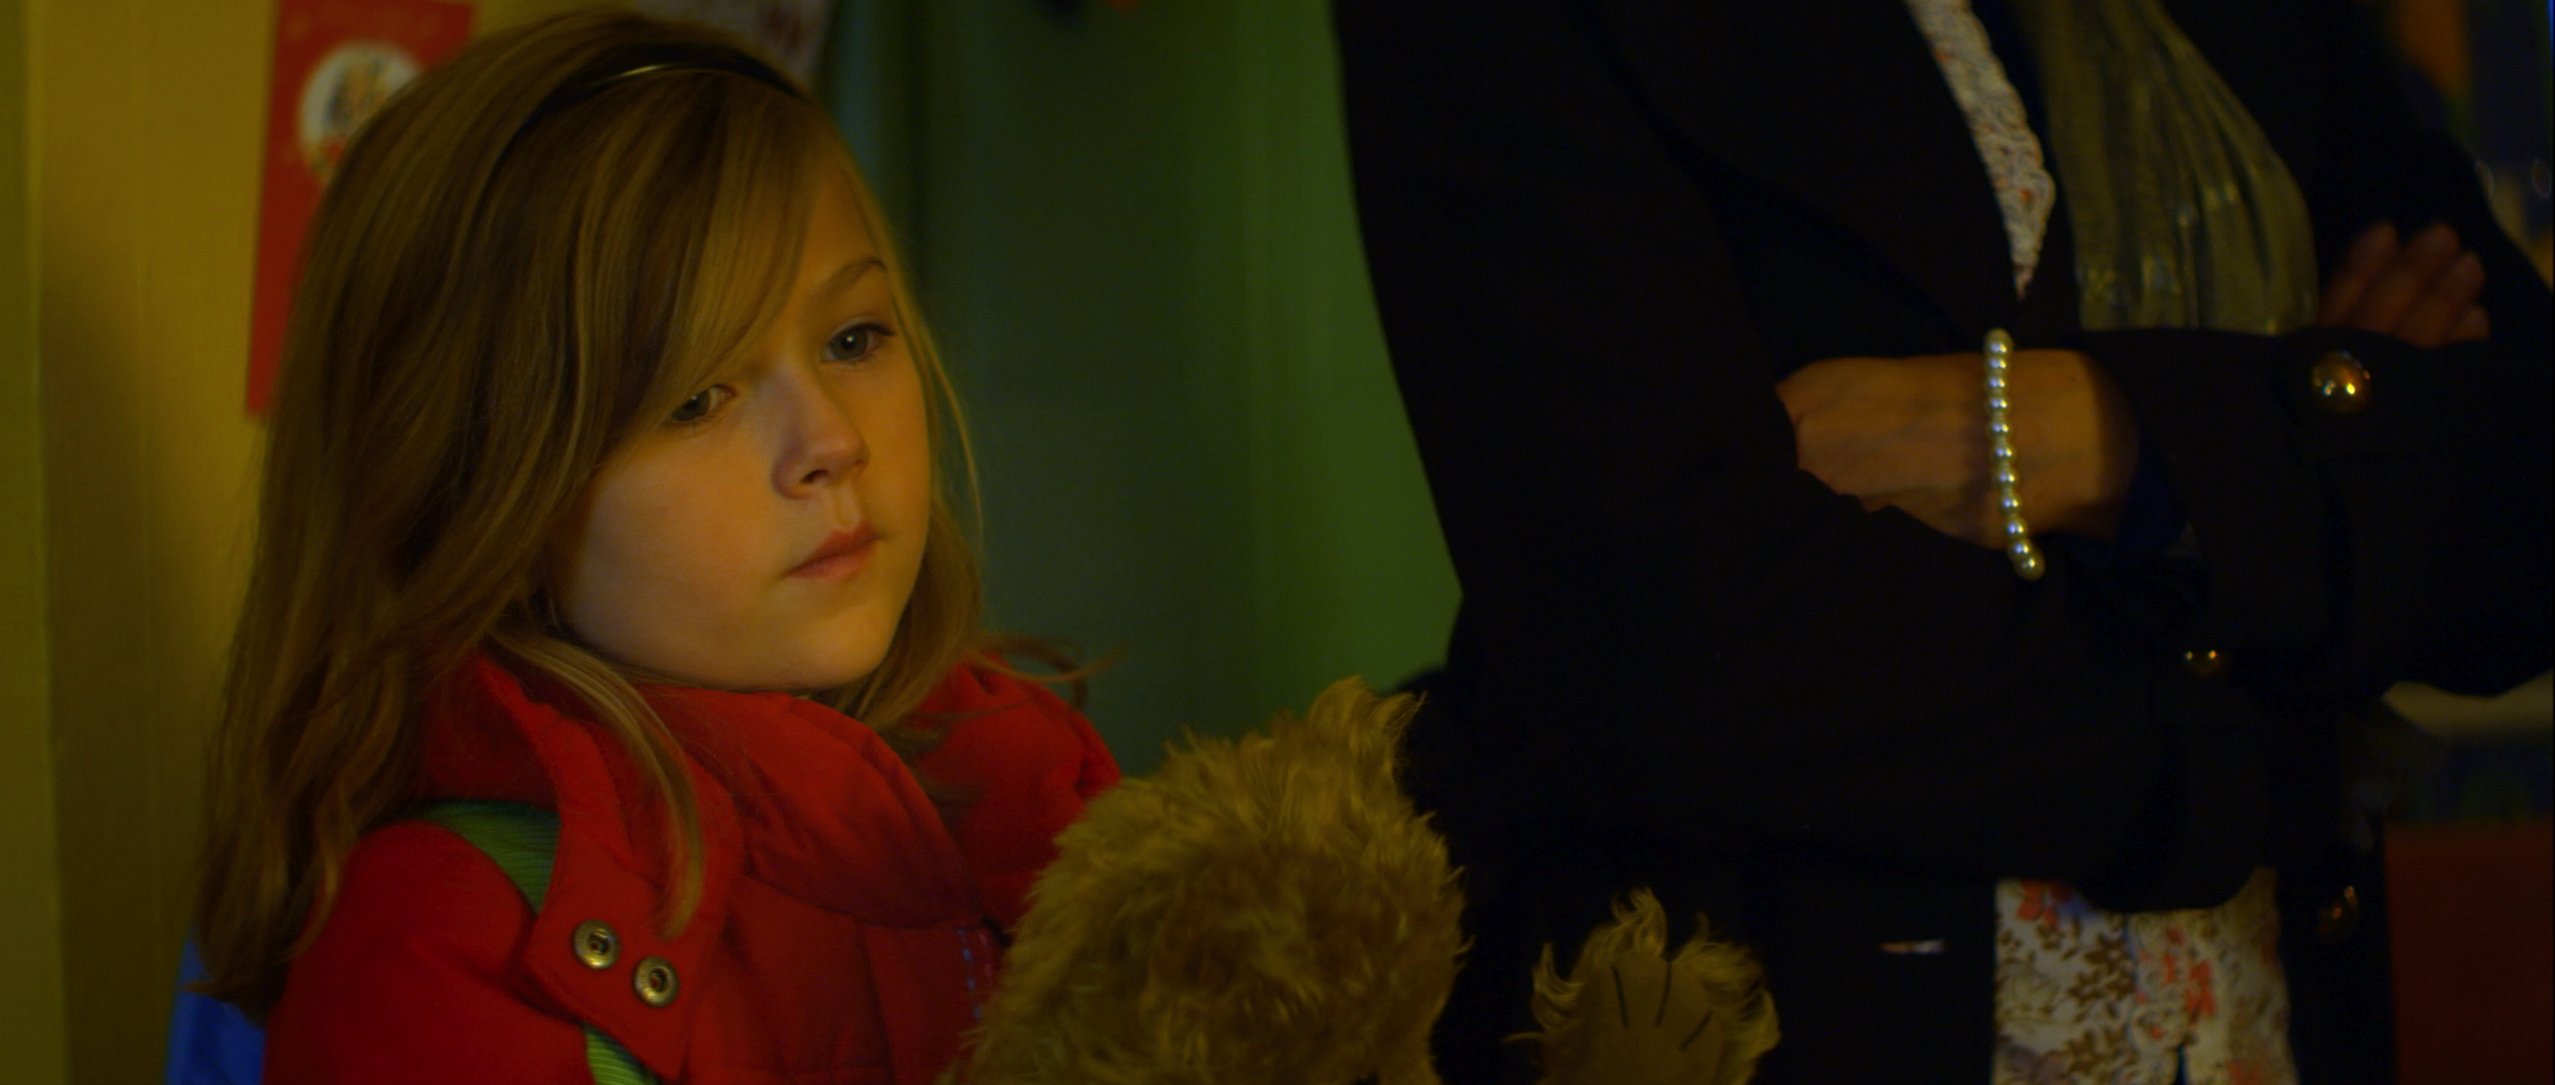 Film Still of Maya Beresford in The Glowing Hours